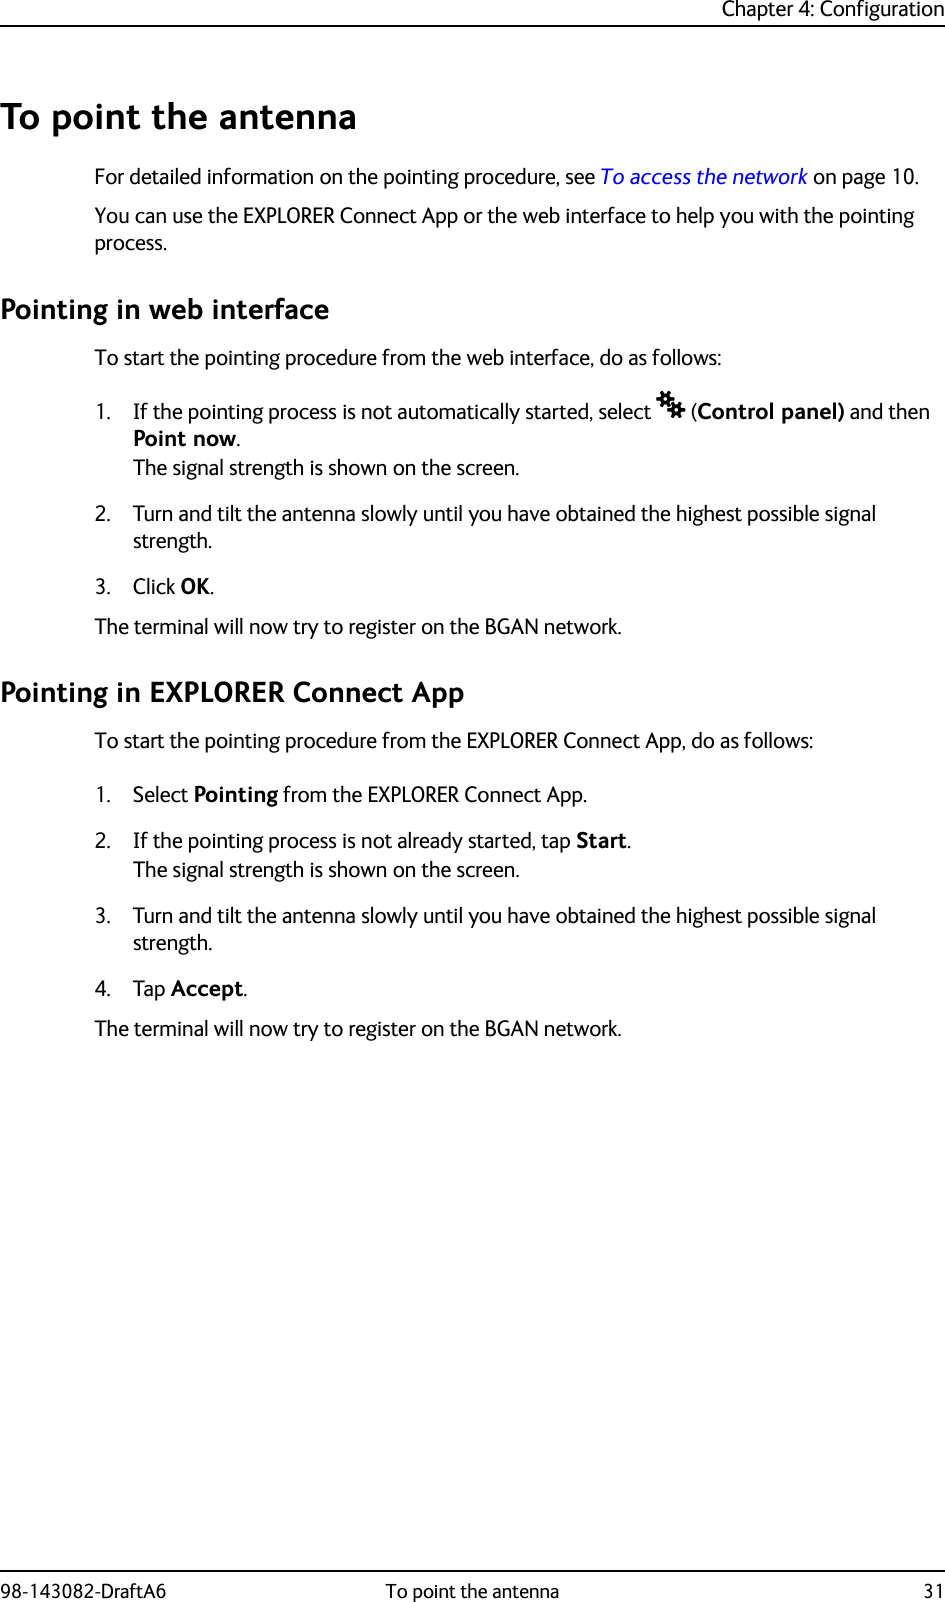 Chapter 4: Configuration98-143082-DraftA6 To point the antenna 31To point the antennaFor detailed information on the pointing procedure, see To access the network on page 10.You can use the EXPLORER Connect App or the web interface to help you with the pointing process. Pointing in web interfaceTo start the pointing procedure from the web interface, do as follows:1. If the pointing process is not automatically started, select  (Control panel) and then Point now.The signal strength is shown on the screen.2. Turn and tilt the antenna slowly until you have obtained the highest possible signal strength.3. Click OK.The terminal will now try to register on the BGAN network.Pointing in EXPLORER Connect AppTo start the pointing procedure from the EXPLORER Connect App, do as follows:1. Select Pointing from the EXPLORER Connect App.2. If the pointing process is not already started, tap Start.The signal strength is shown on the screen.3. Turn and tilt the antenna slowly until you have obtained the highest possible signal strength.4. Tap Accept.The terminal will now try to register on the BGAN network.